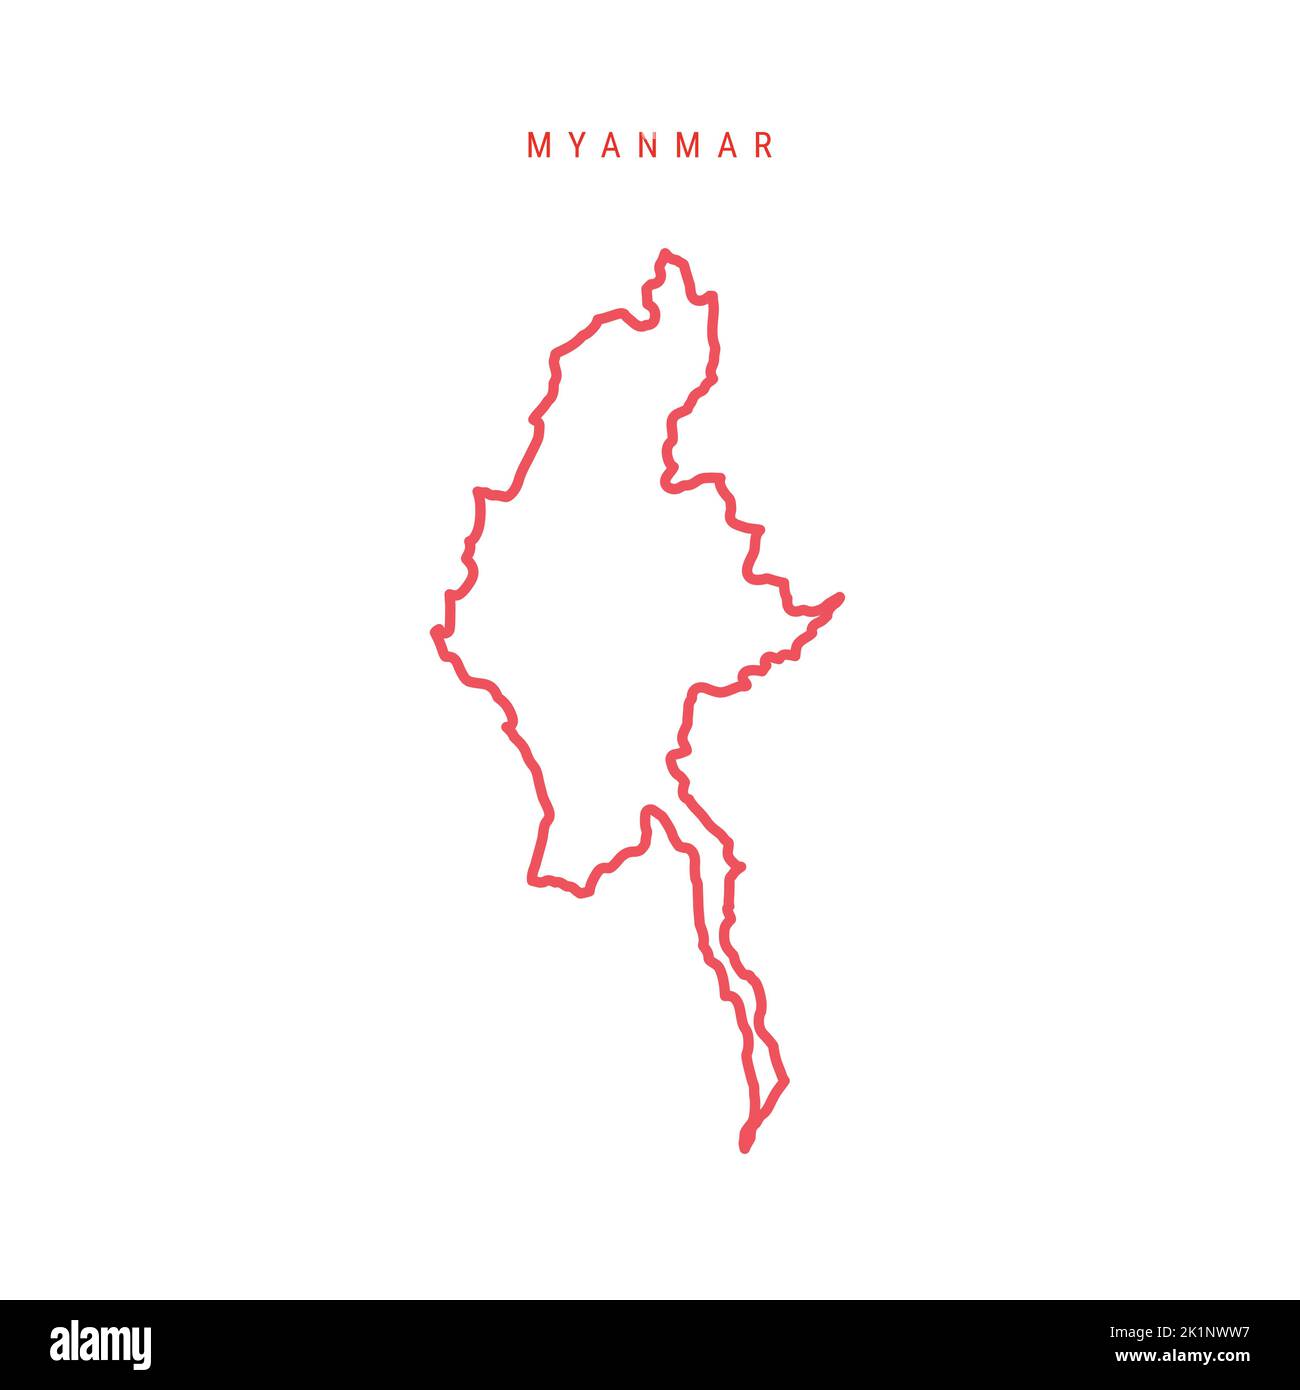 Myanmar editable outline map. Burma red border. Country name. Adjust line weight. Change to any color. Vector illustration. Stock Vector